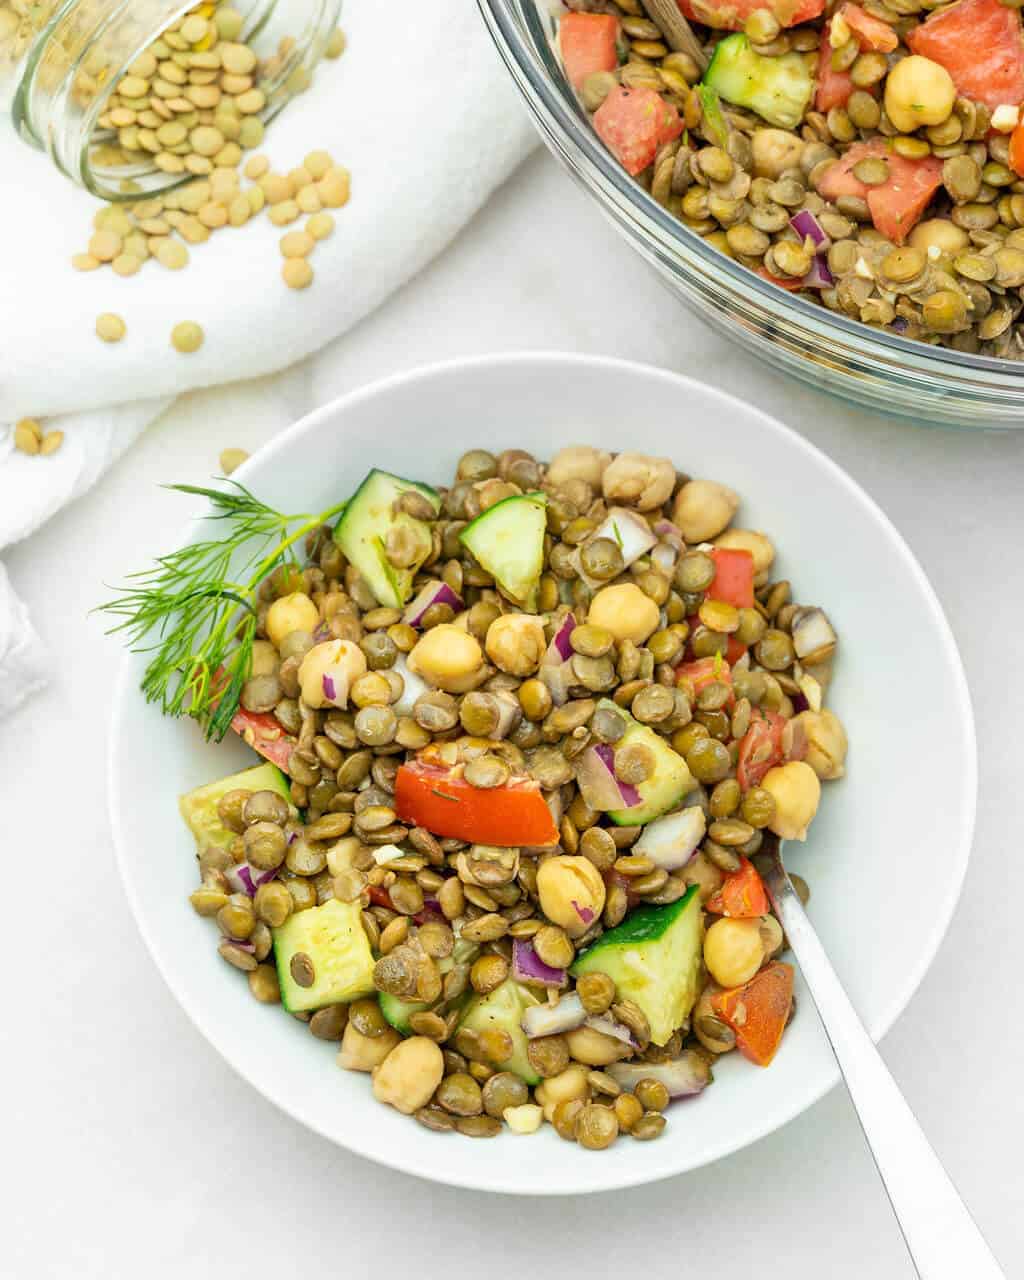 Top view of Mediterranean lentil salad in a white bowl.